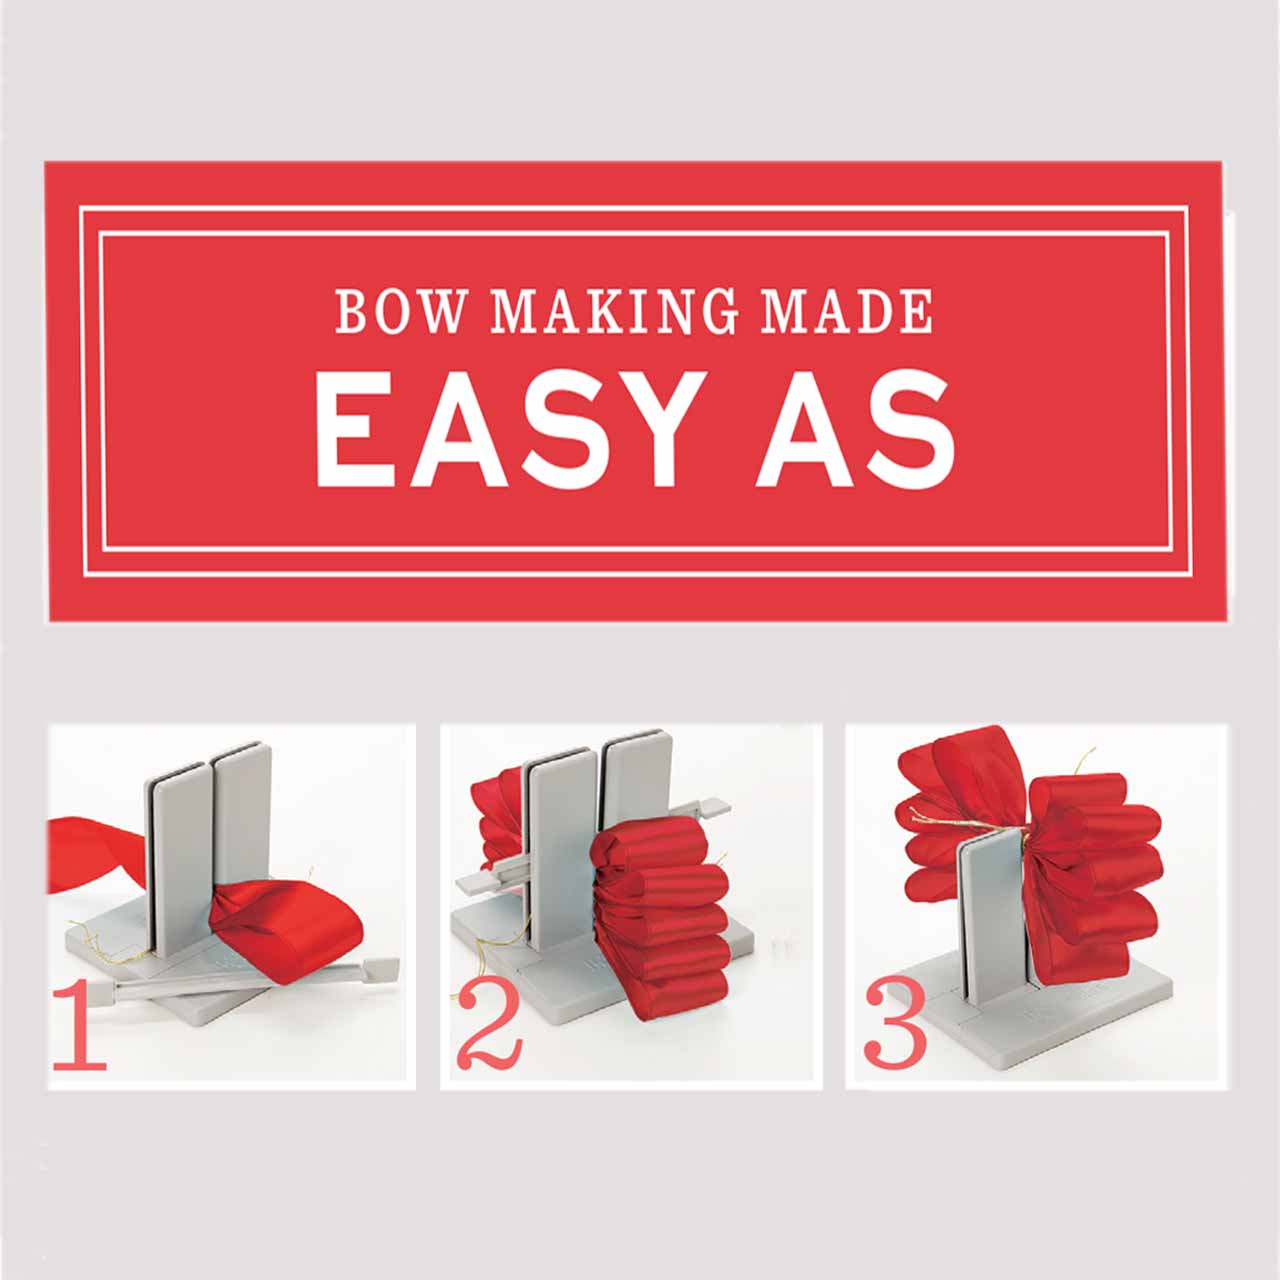 How to Make a Bow with the Bowdabra Bow Making Design Tool